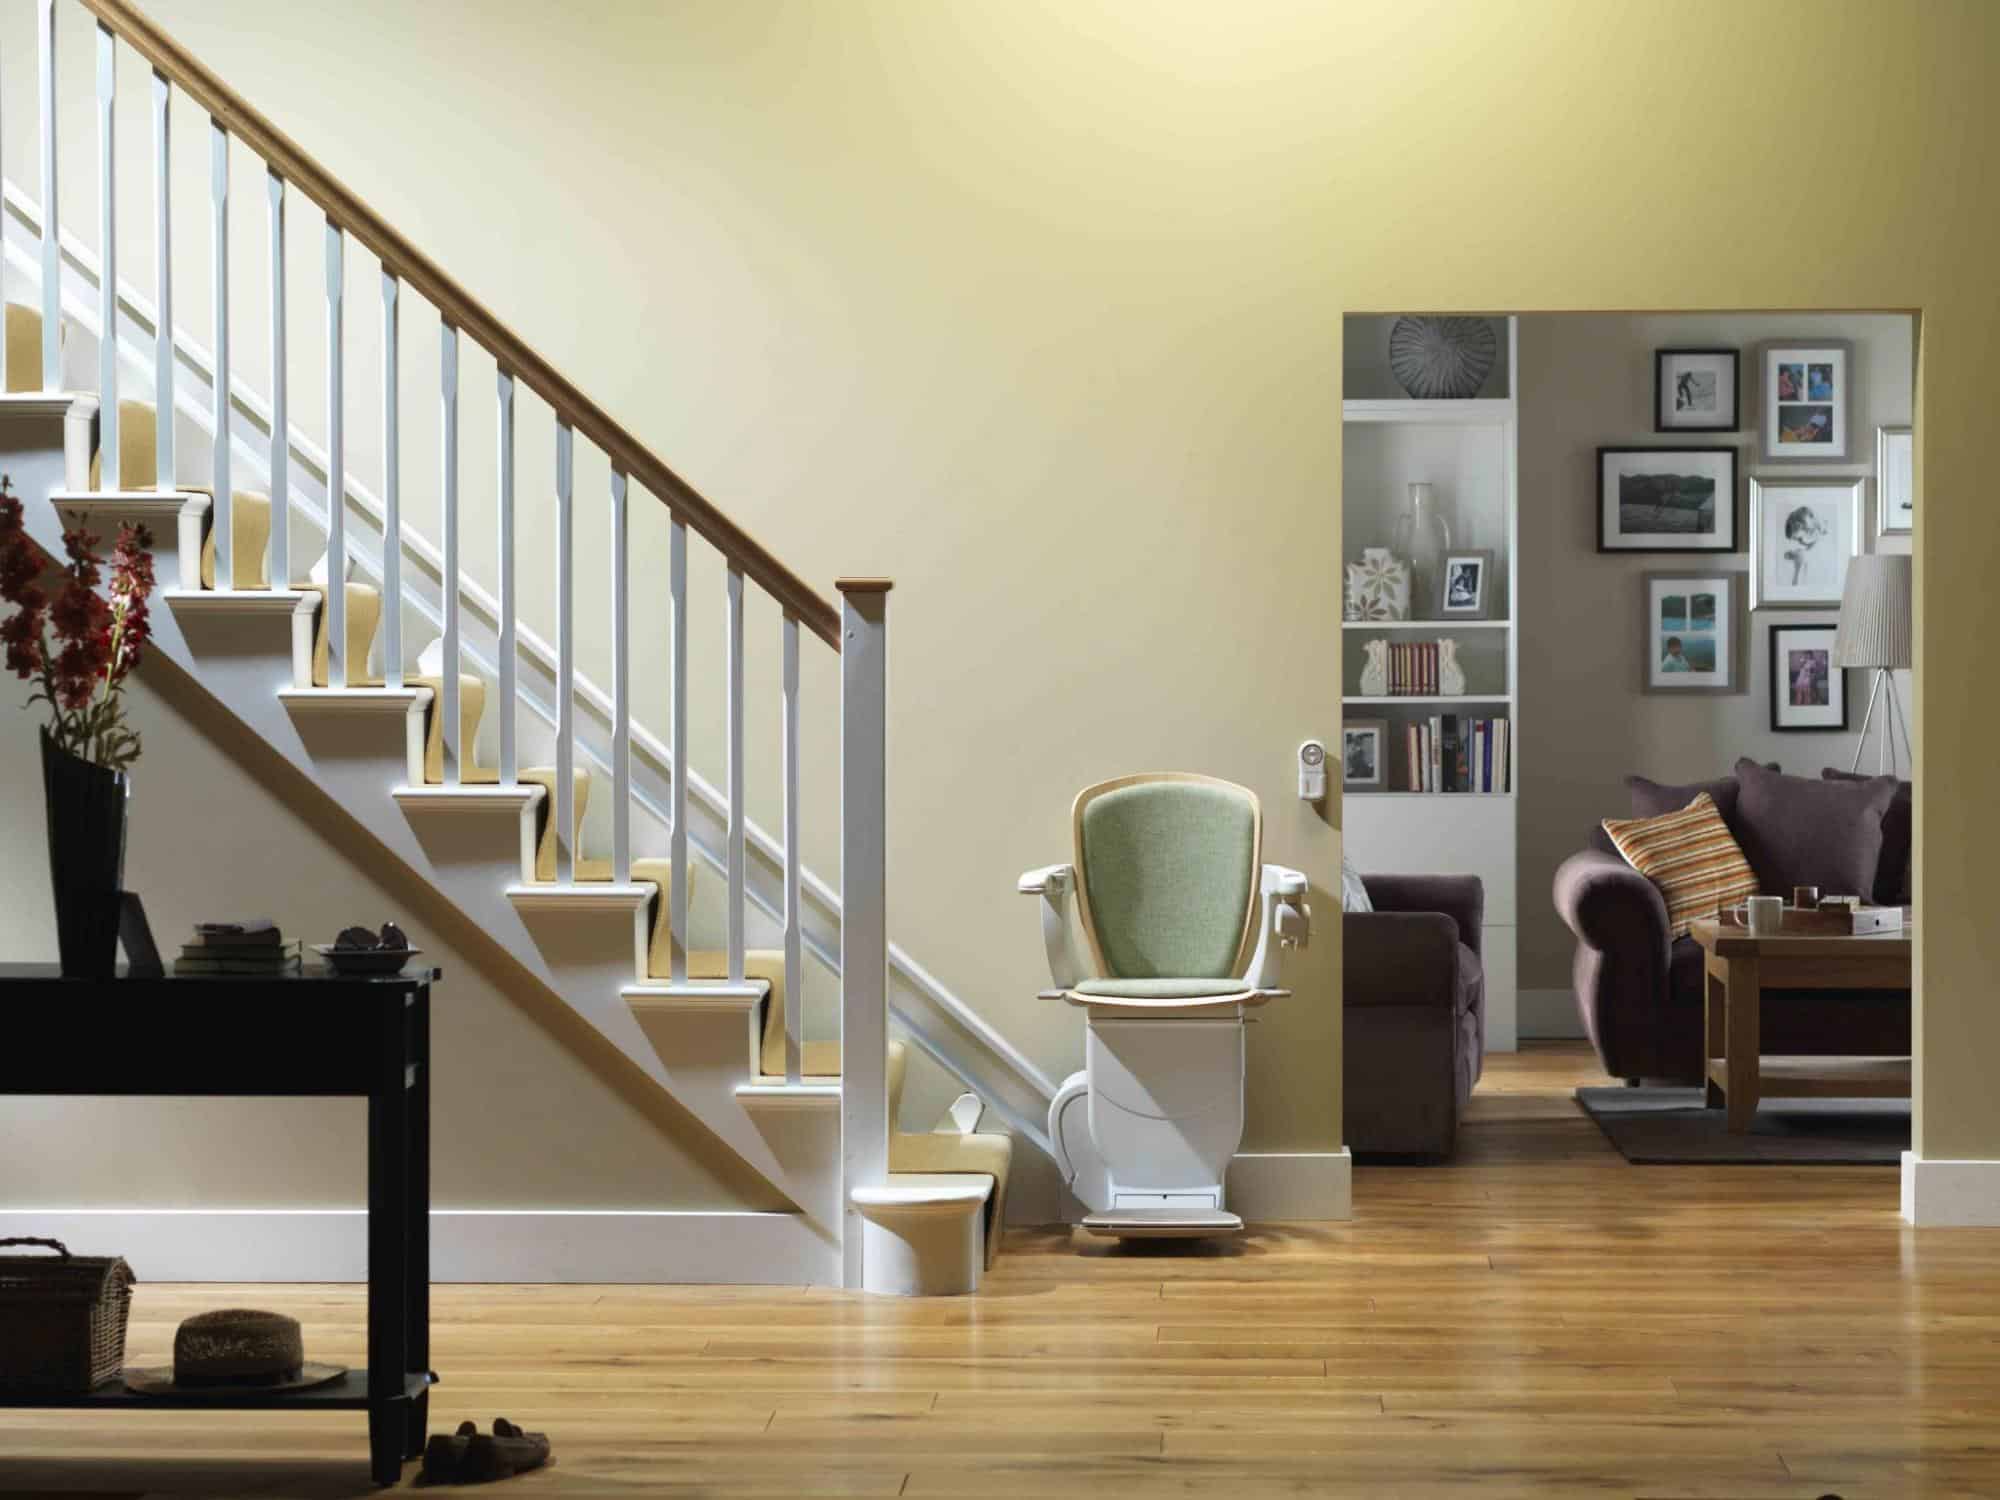 Stannah Stairlift Rental Liverpool - Stair Lifts - Stannah ...